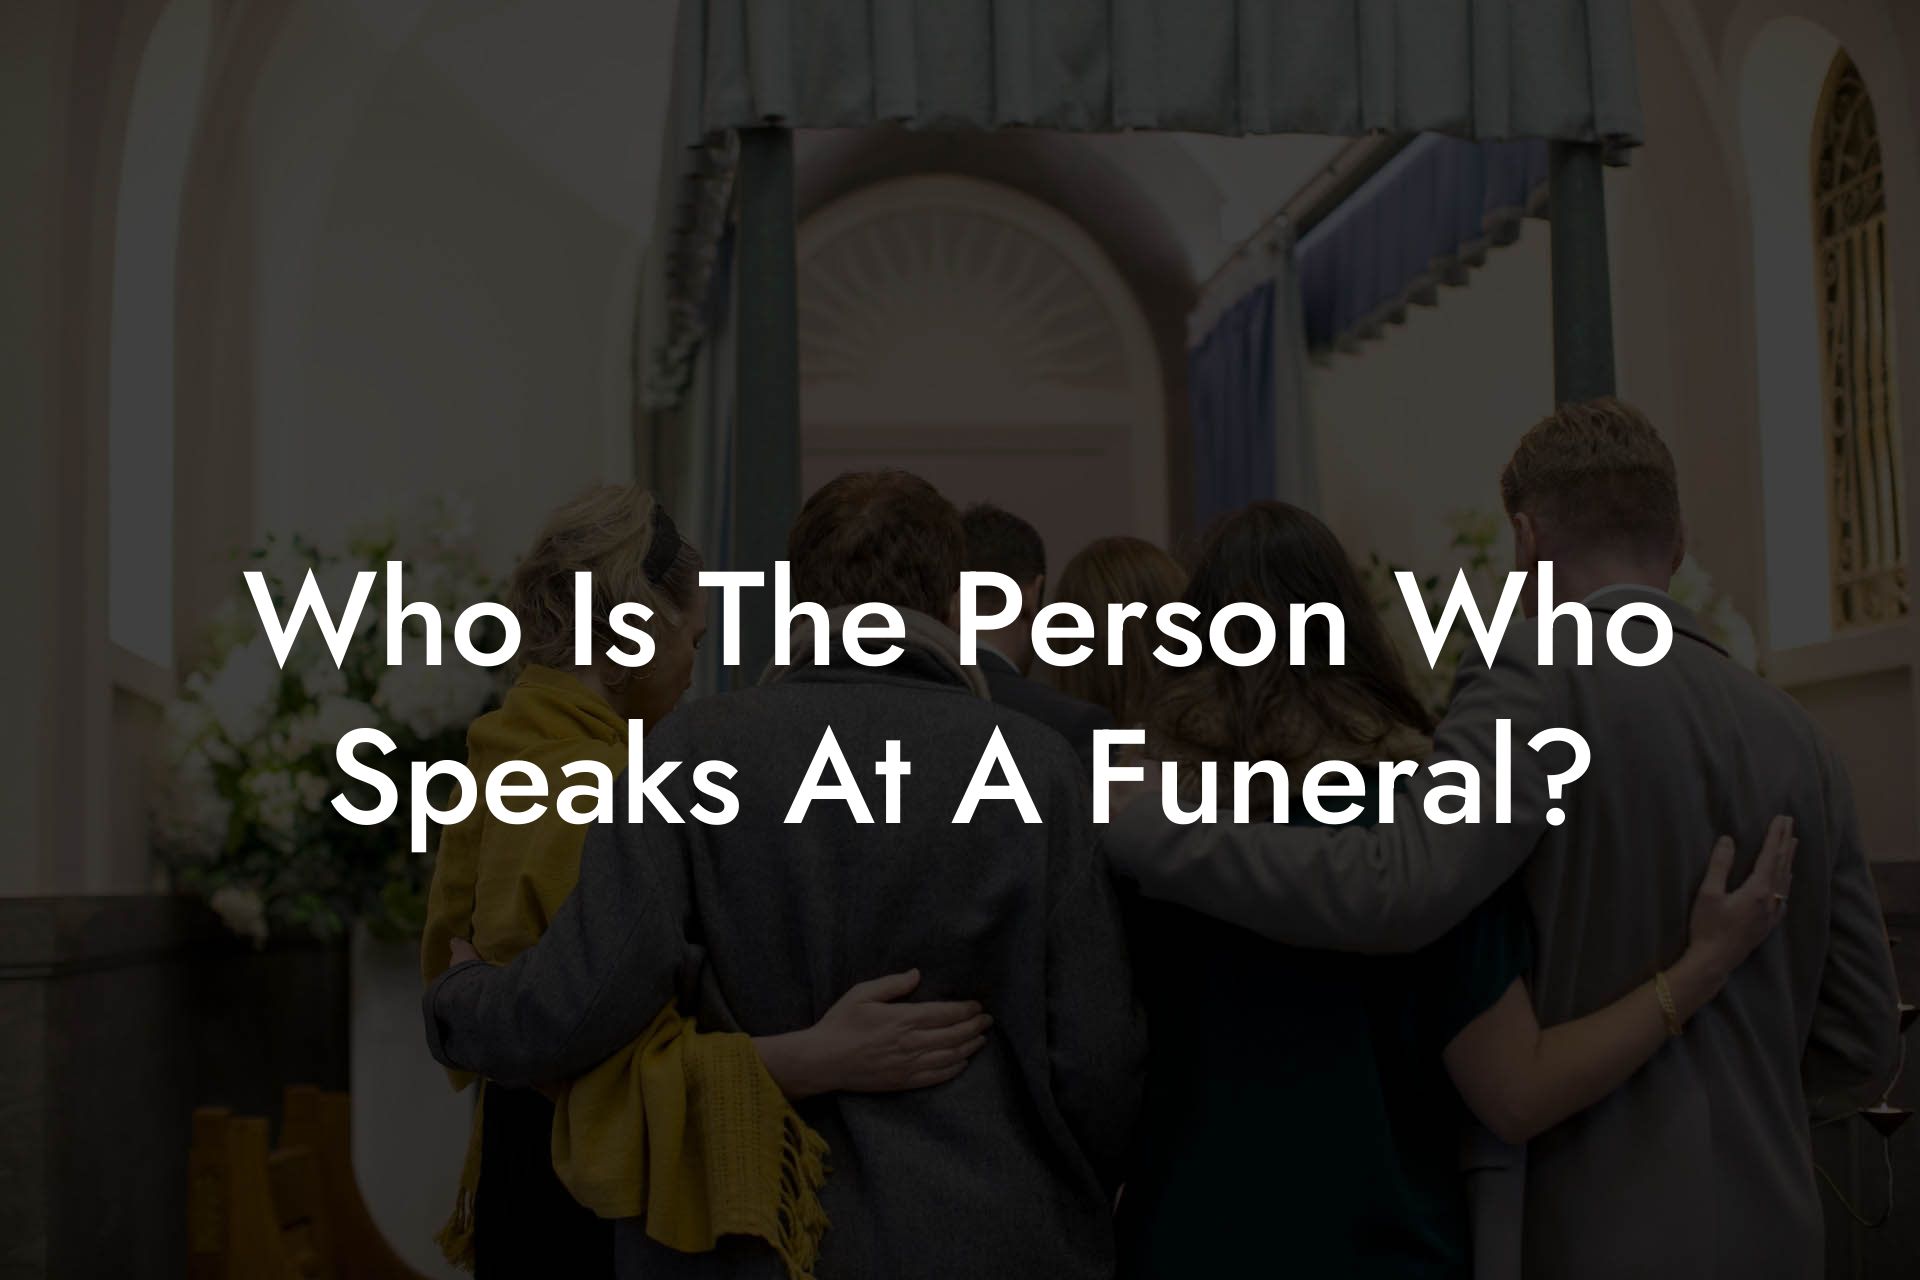 Who Is The Person Who Speaks At A Funeral?